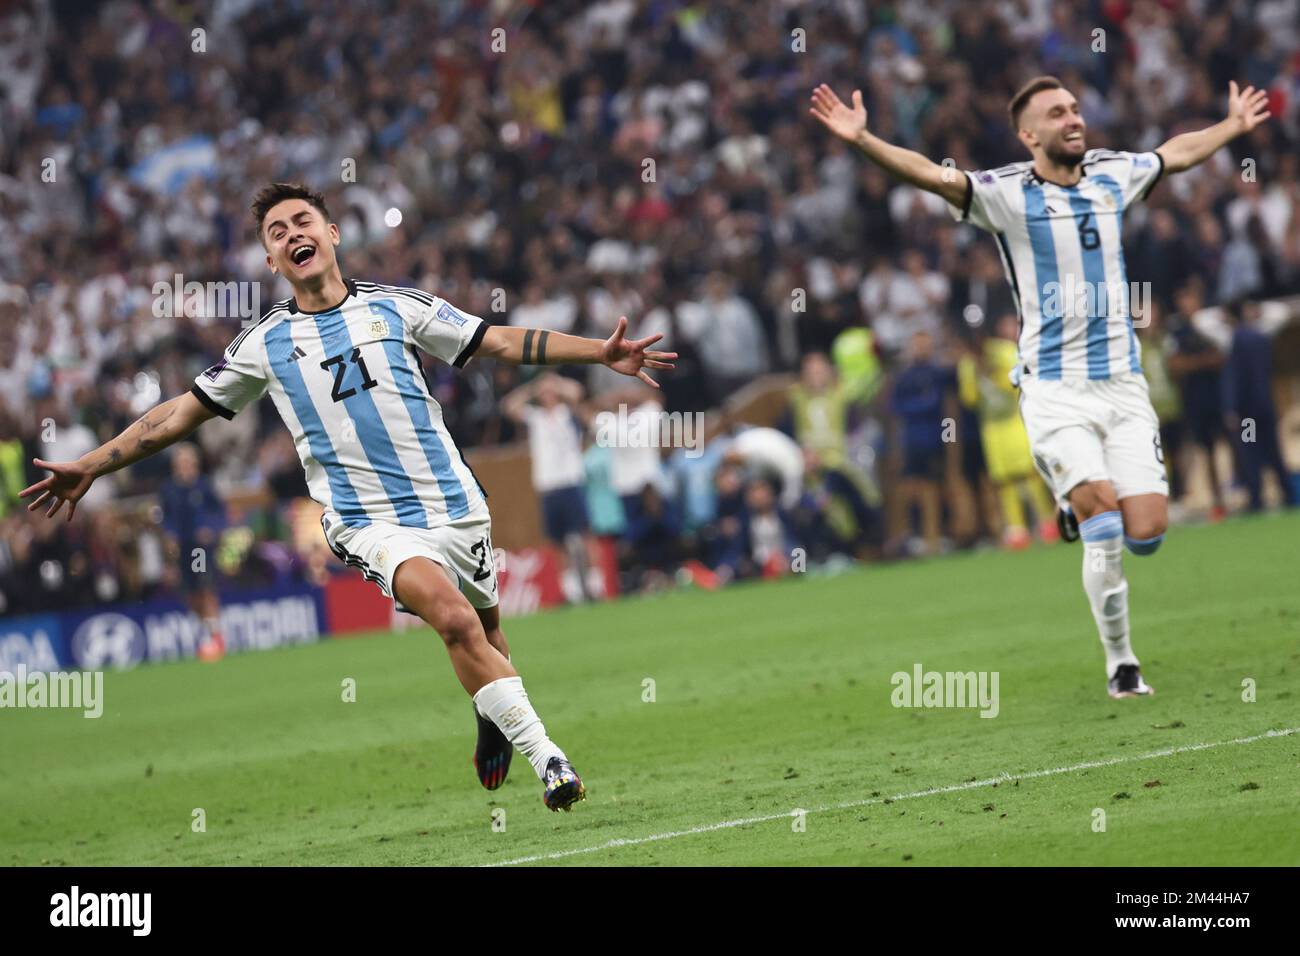 Lusail, Qatar. 18th Dec, 2022. Paulo Dybala (L) and German Pezzella of Argentina celebrate after the team winning the Final between Argentina and France at the 2022 FIFA World Cup at Lusail Stadium in Lusail, Qatar, Dec. 18, 2022. Credit: Lan Hongguang/Xinhua/Alamy Live News Stock Photo